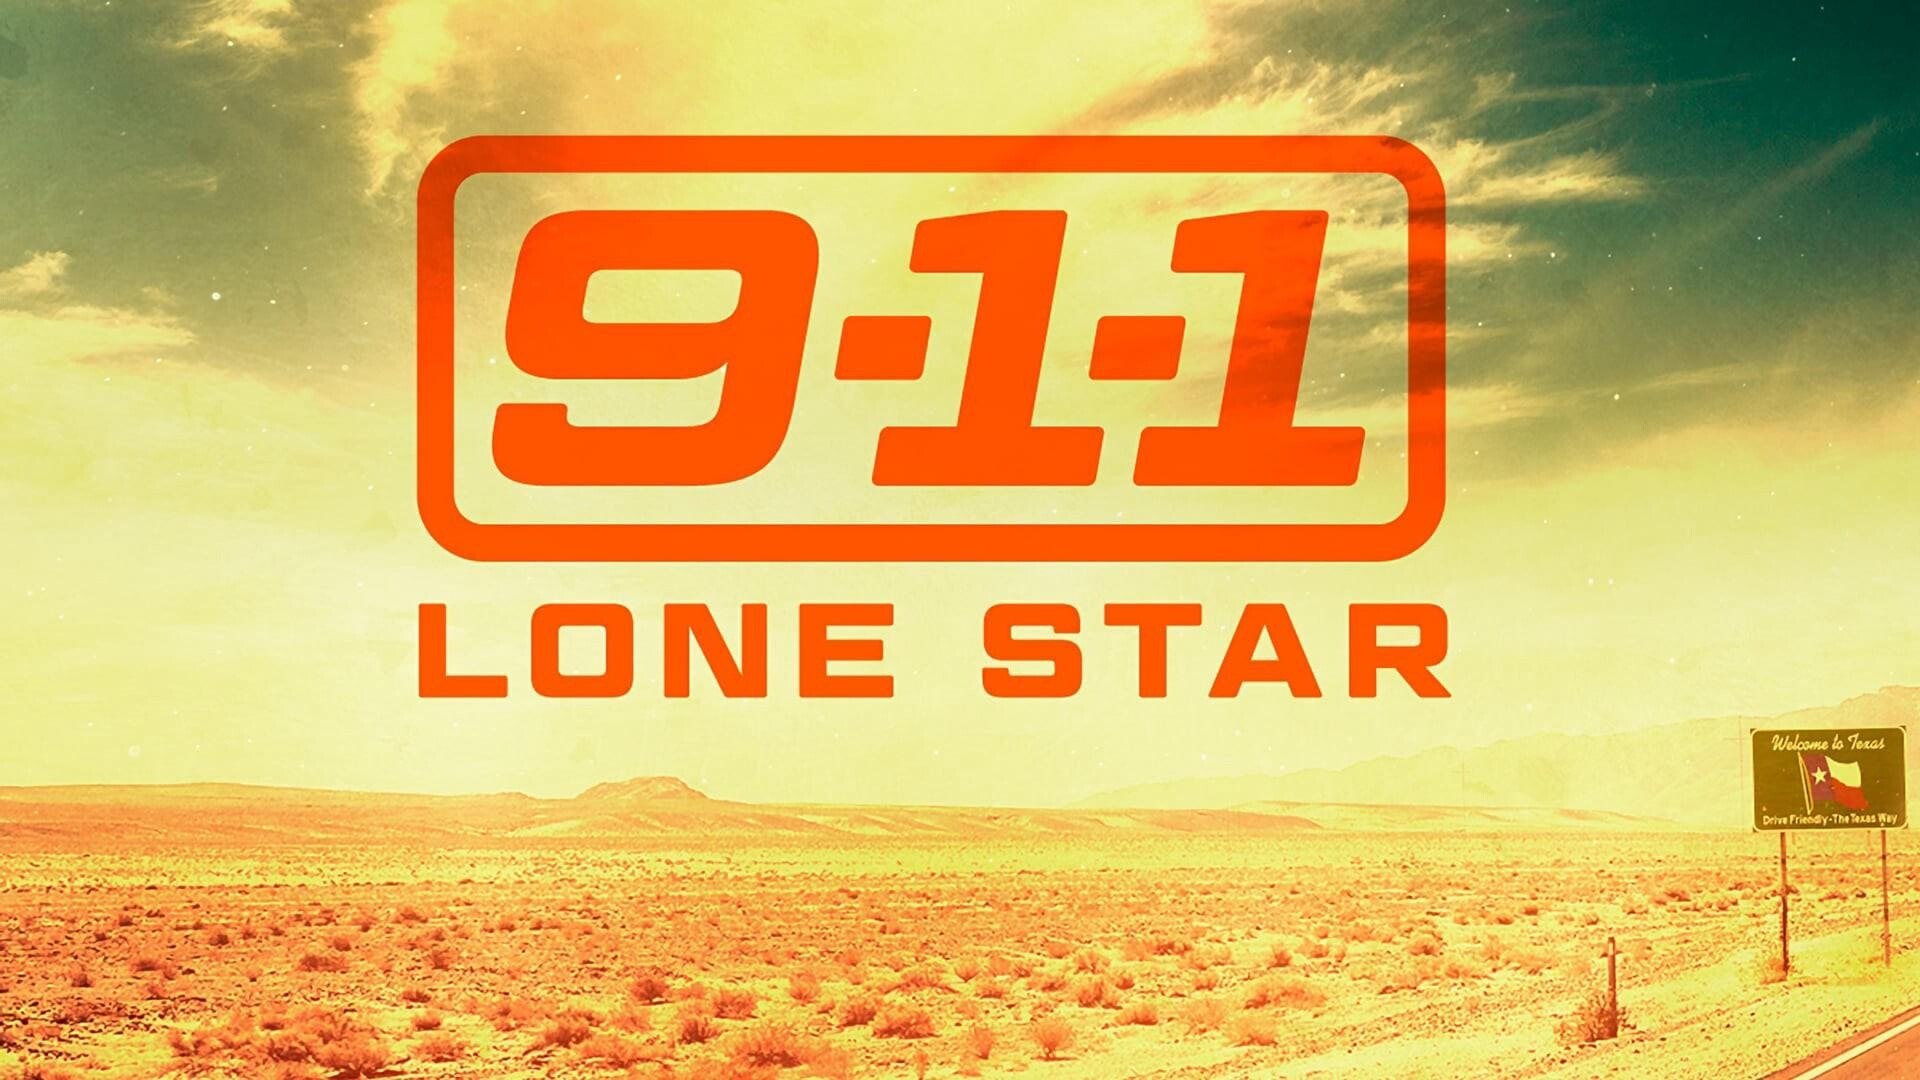 9-1-1: Lone Star (TV Series): An American Procedural Drama Television Series Focusing On The Fire, Police, And Ambulance Departments, Austin, Texas, 42 Episodes Over 3 Seasons. 1920x1080 Full HD Background.